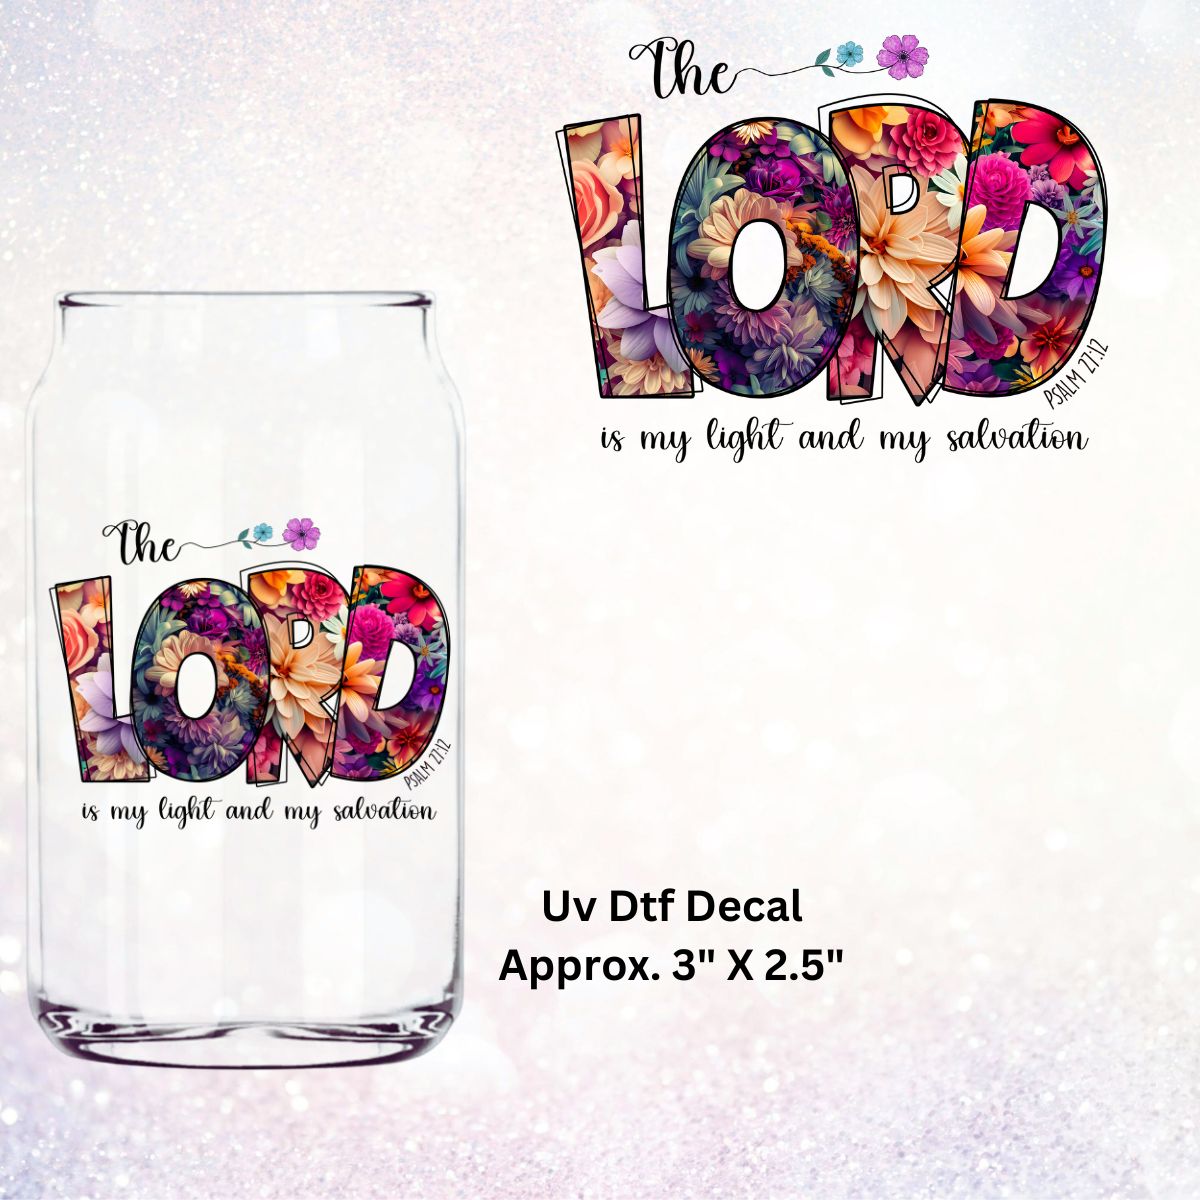 Uv Dtf Decal The Lord is my salvation